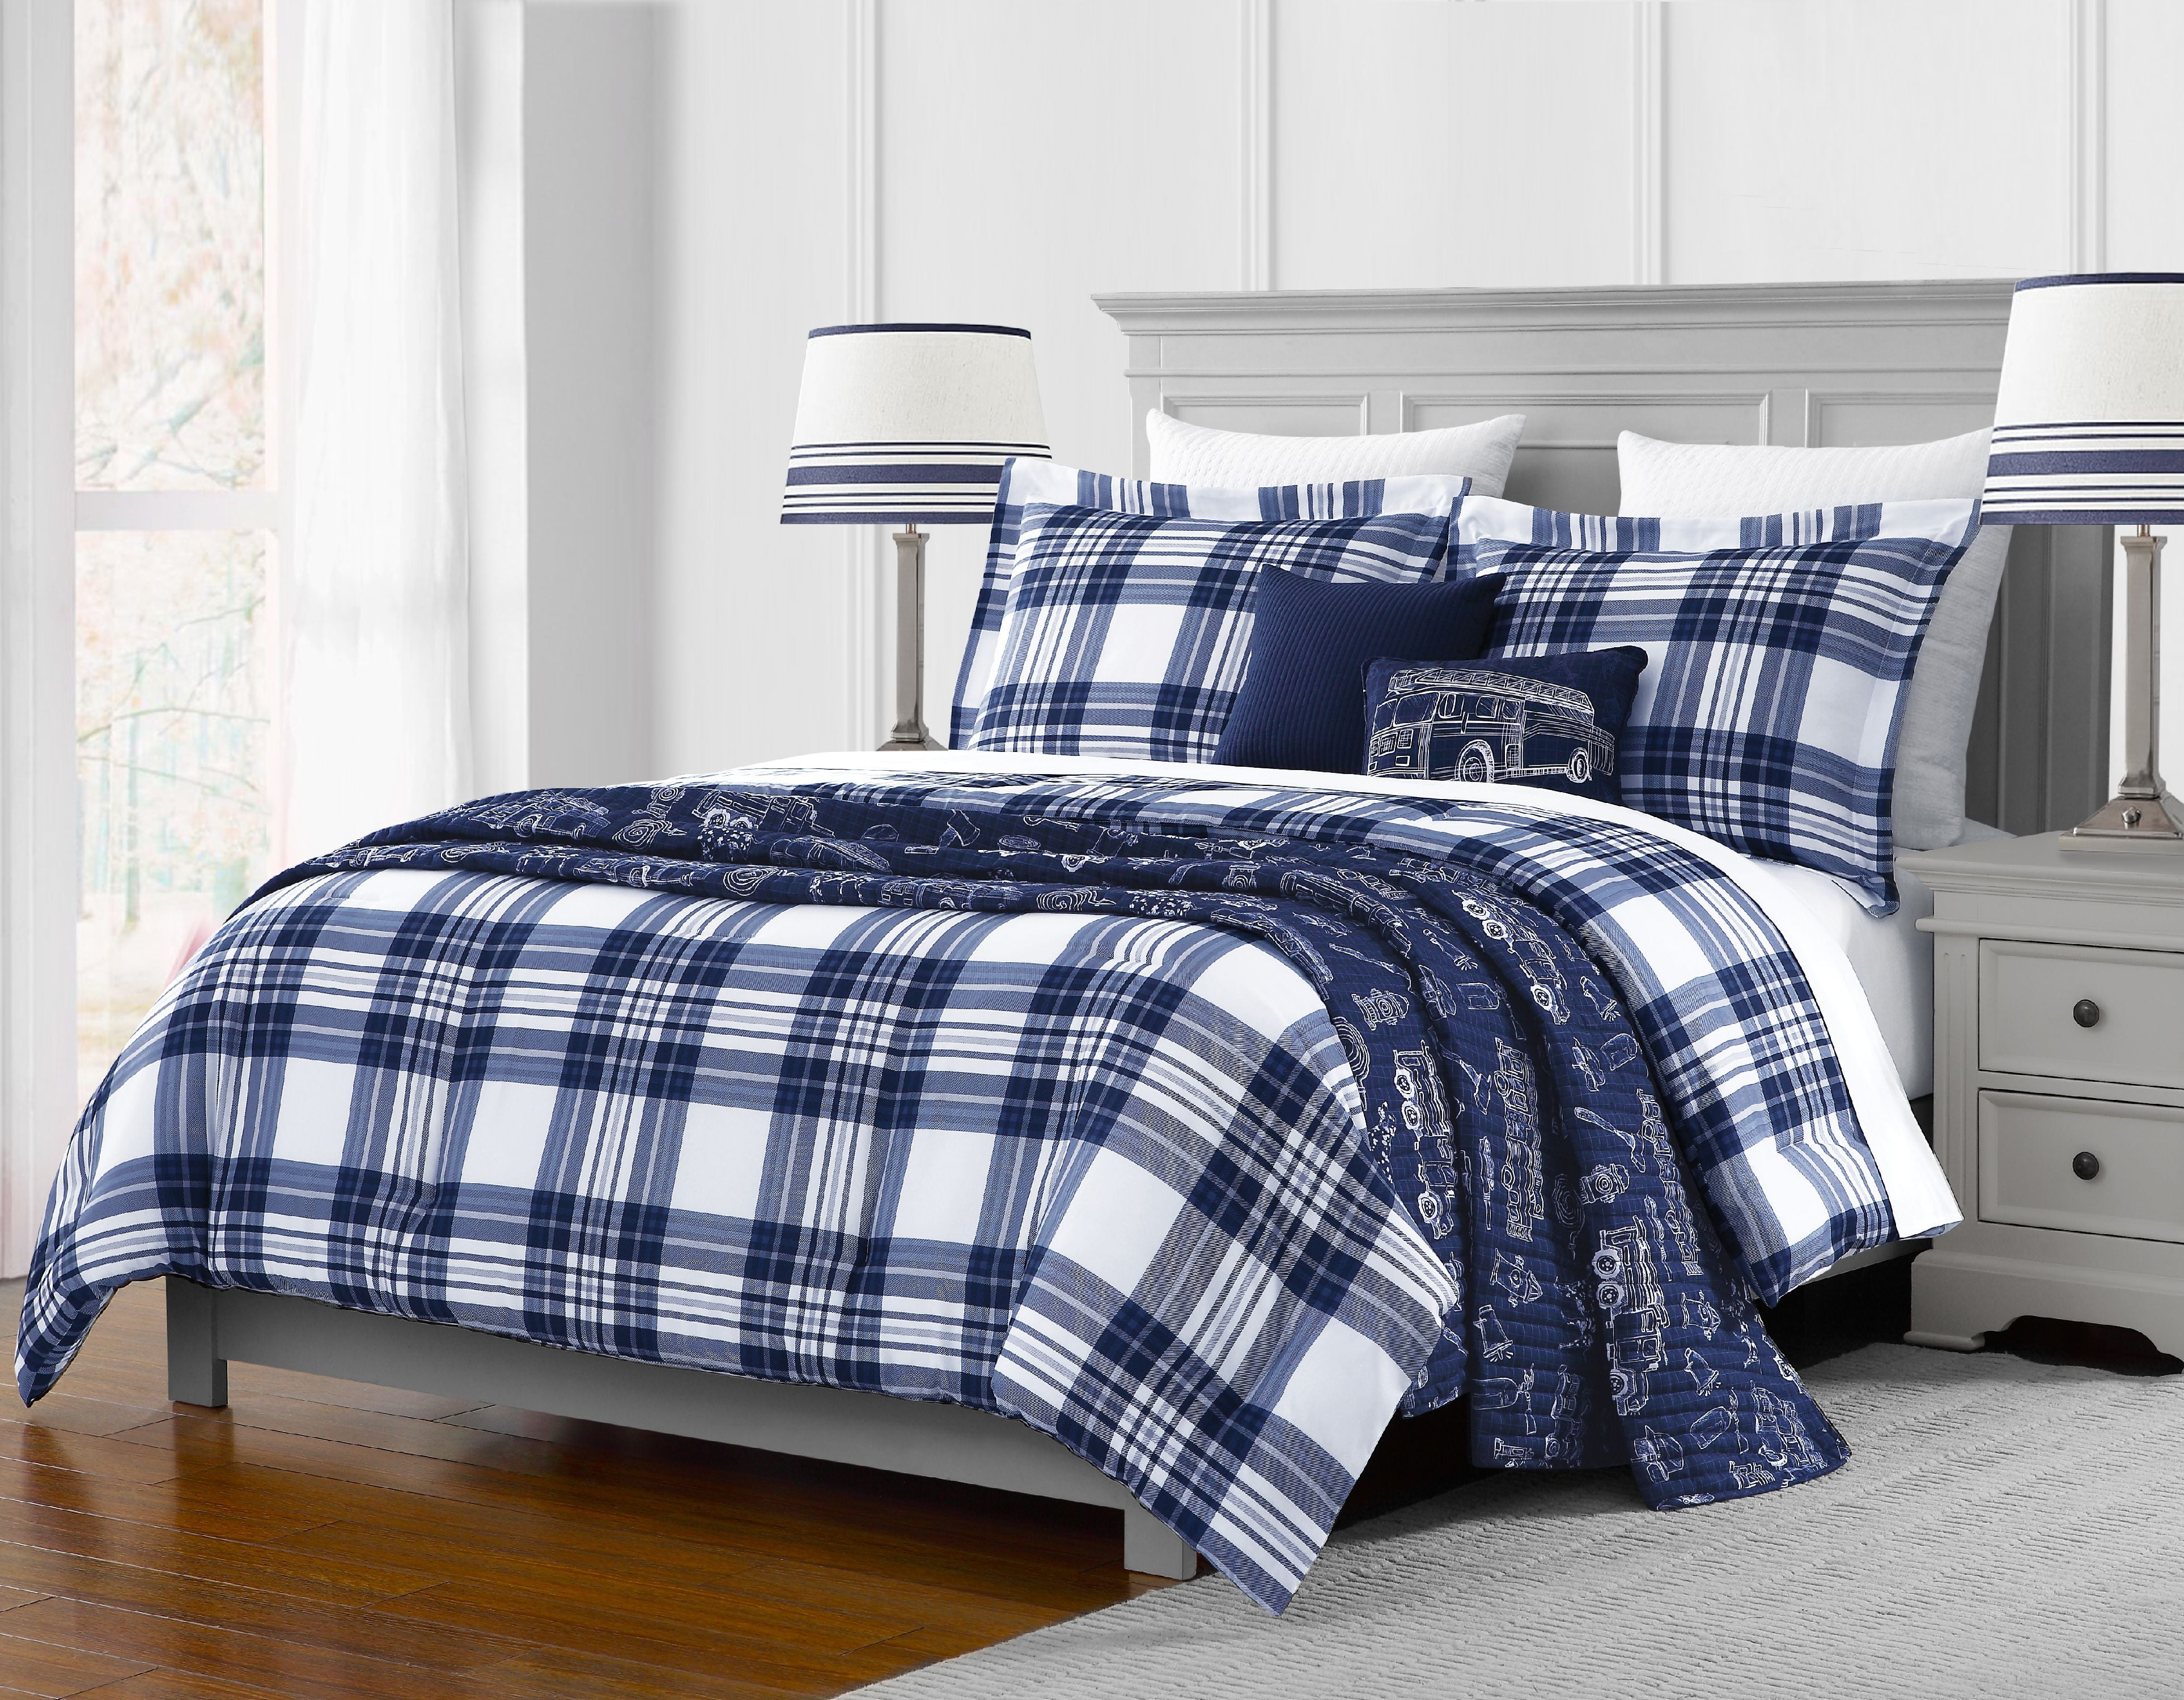 Madras Americana Cotton fitted Bed Sheet Set